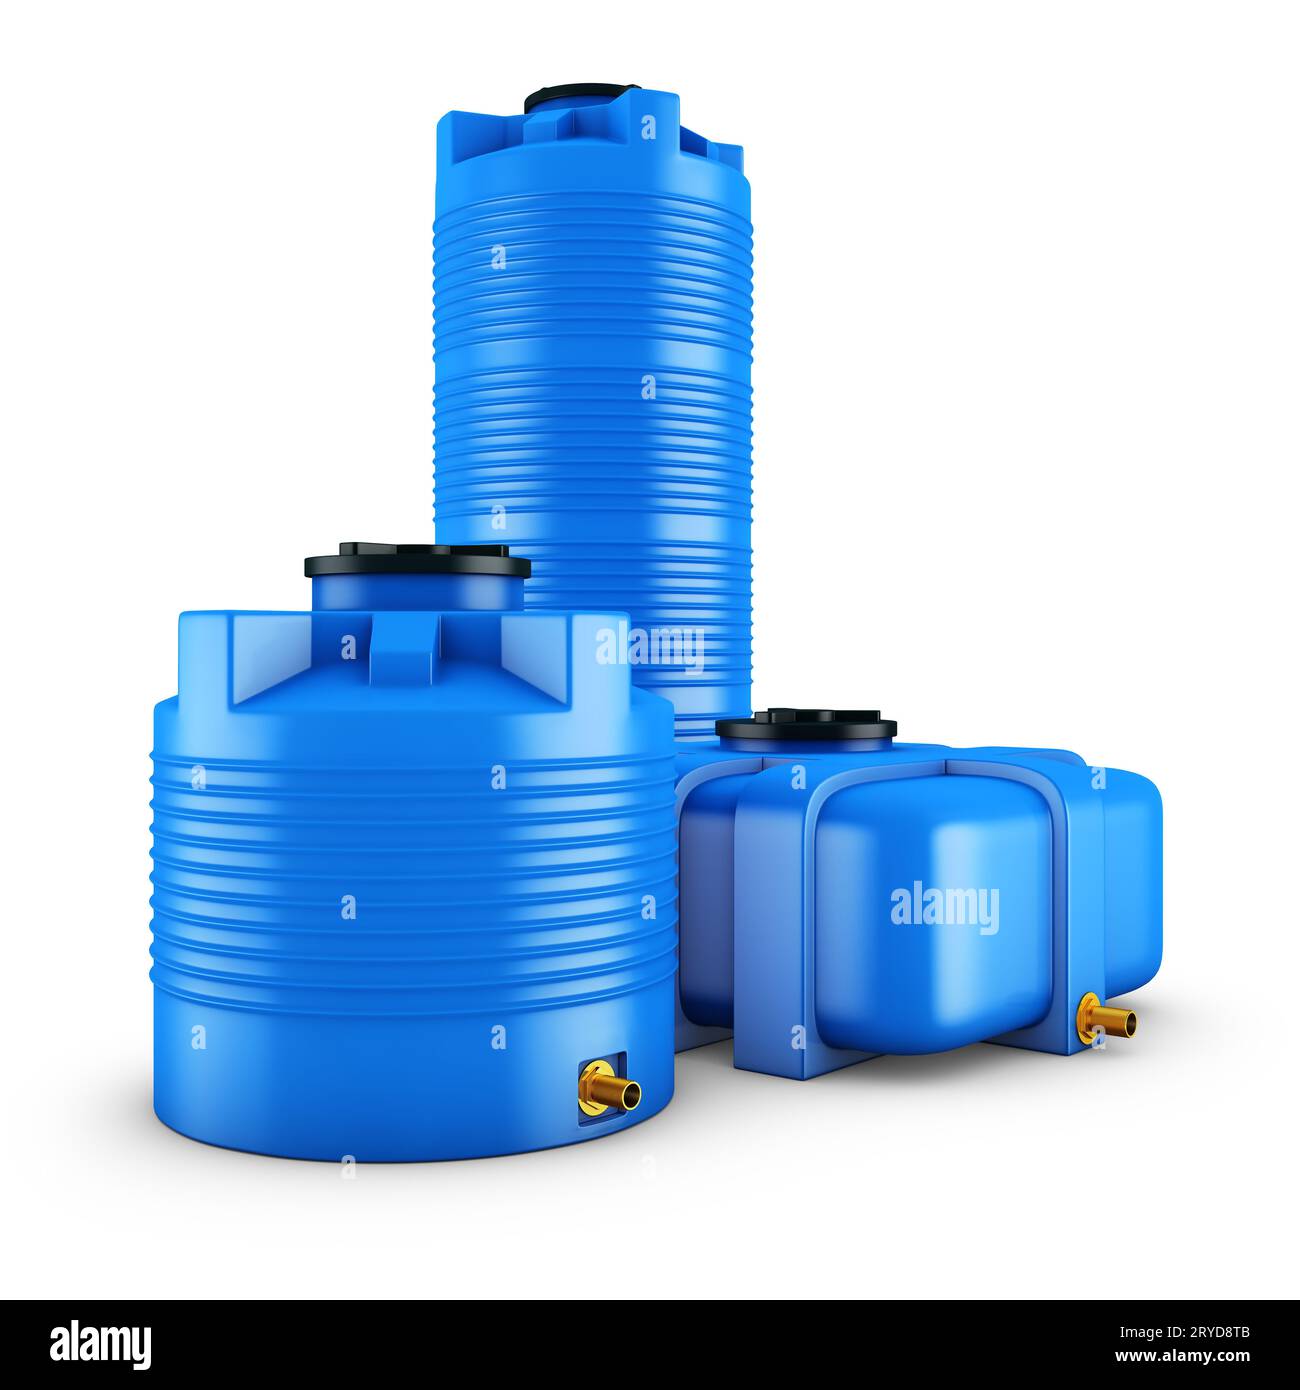 https://c8.alamy.com/comp/2RYD8TB/containers-for-water-2RYD8TB.jpg